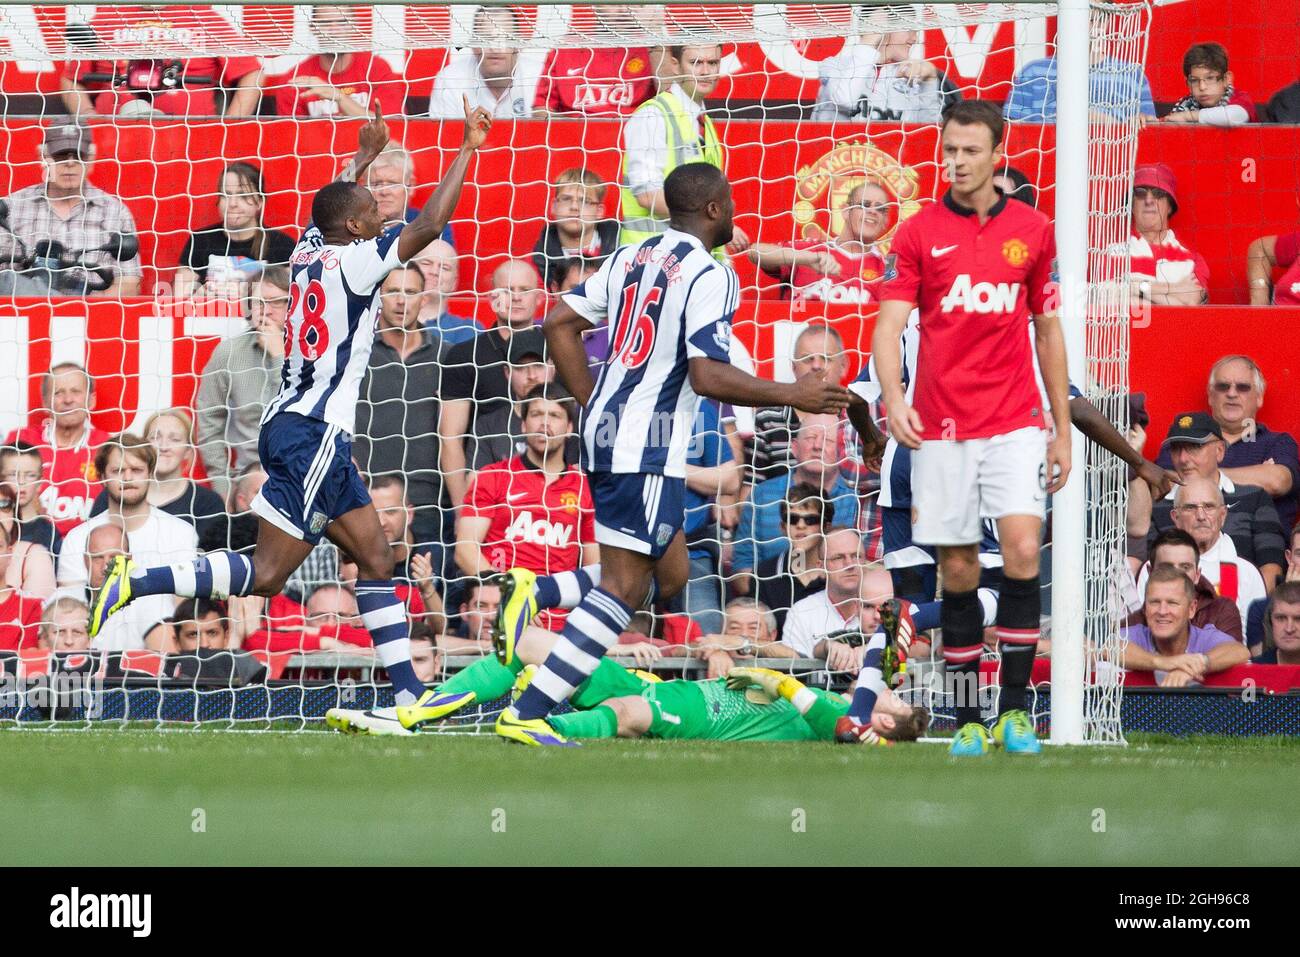 West Brom's Morgan Amalfitano celebrates his winning goal during the Barclays Premier League match between Manchester United and West Bromwich Albion at the Old Trafford in Manchester, United Kingdom on September 28, 2013. Stock Photo